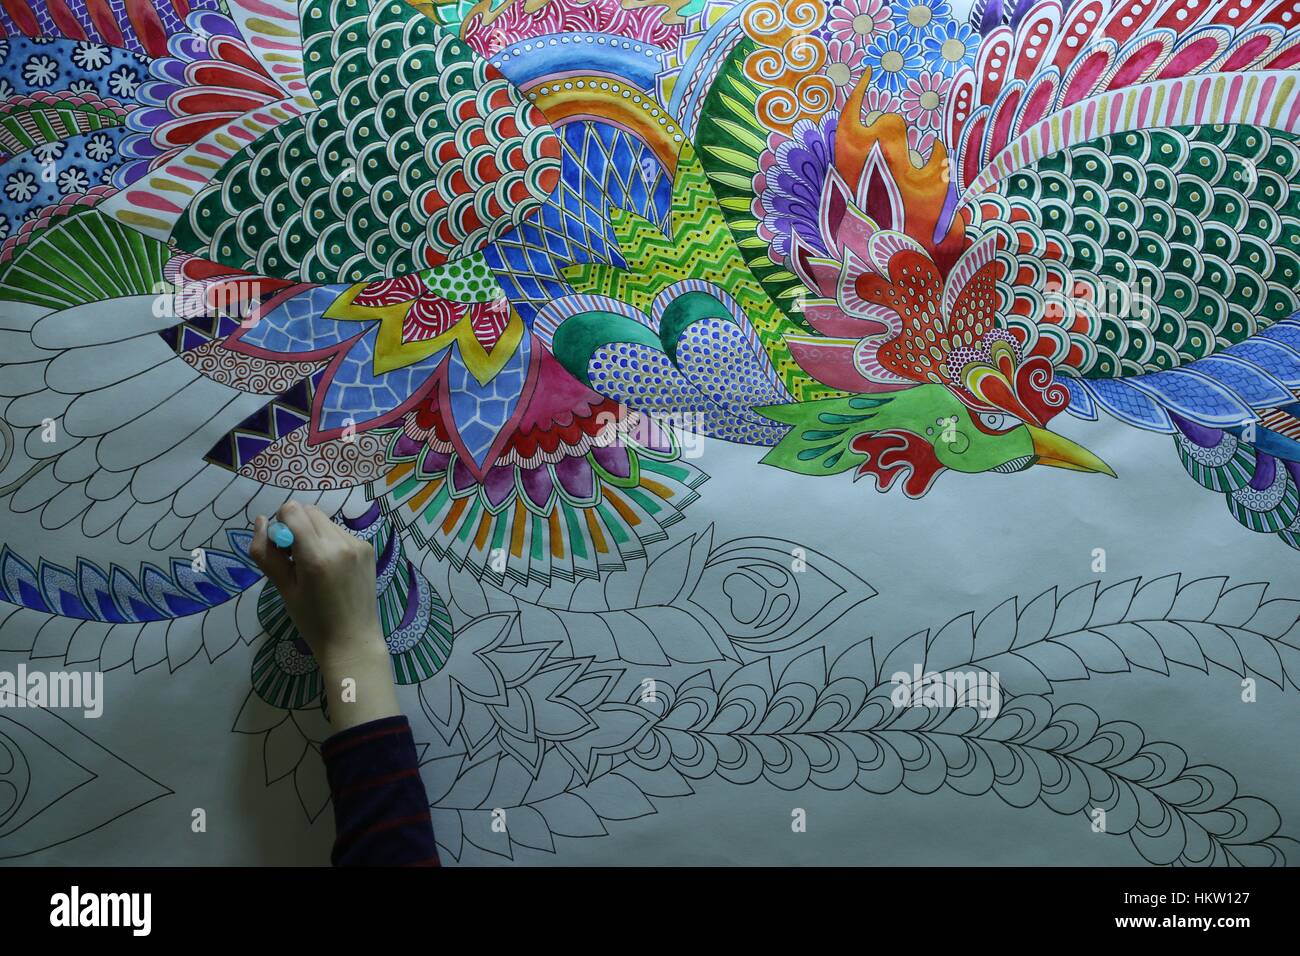 Frankfurt, Germany. 29th Jan, 2017. An artist draws during the exhibition 'Creativeworld', the world's biggest trade fair for hobby, arts & crafts and artists' requisites in Frankfurt, Germany, on Jan. 29, 2017. The Exhibition is held from Jan. 28 to Jan. 31. Credit: Luo Huanhuan/Xinhua/Alamy Live News Stock Photo